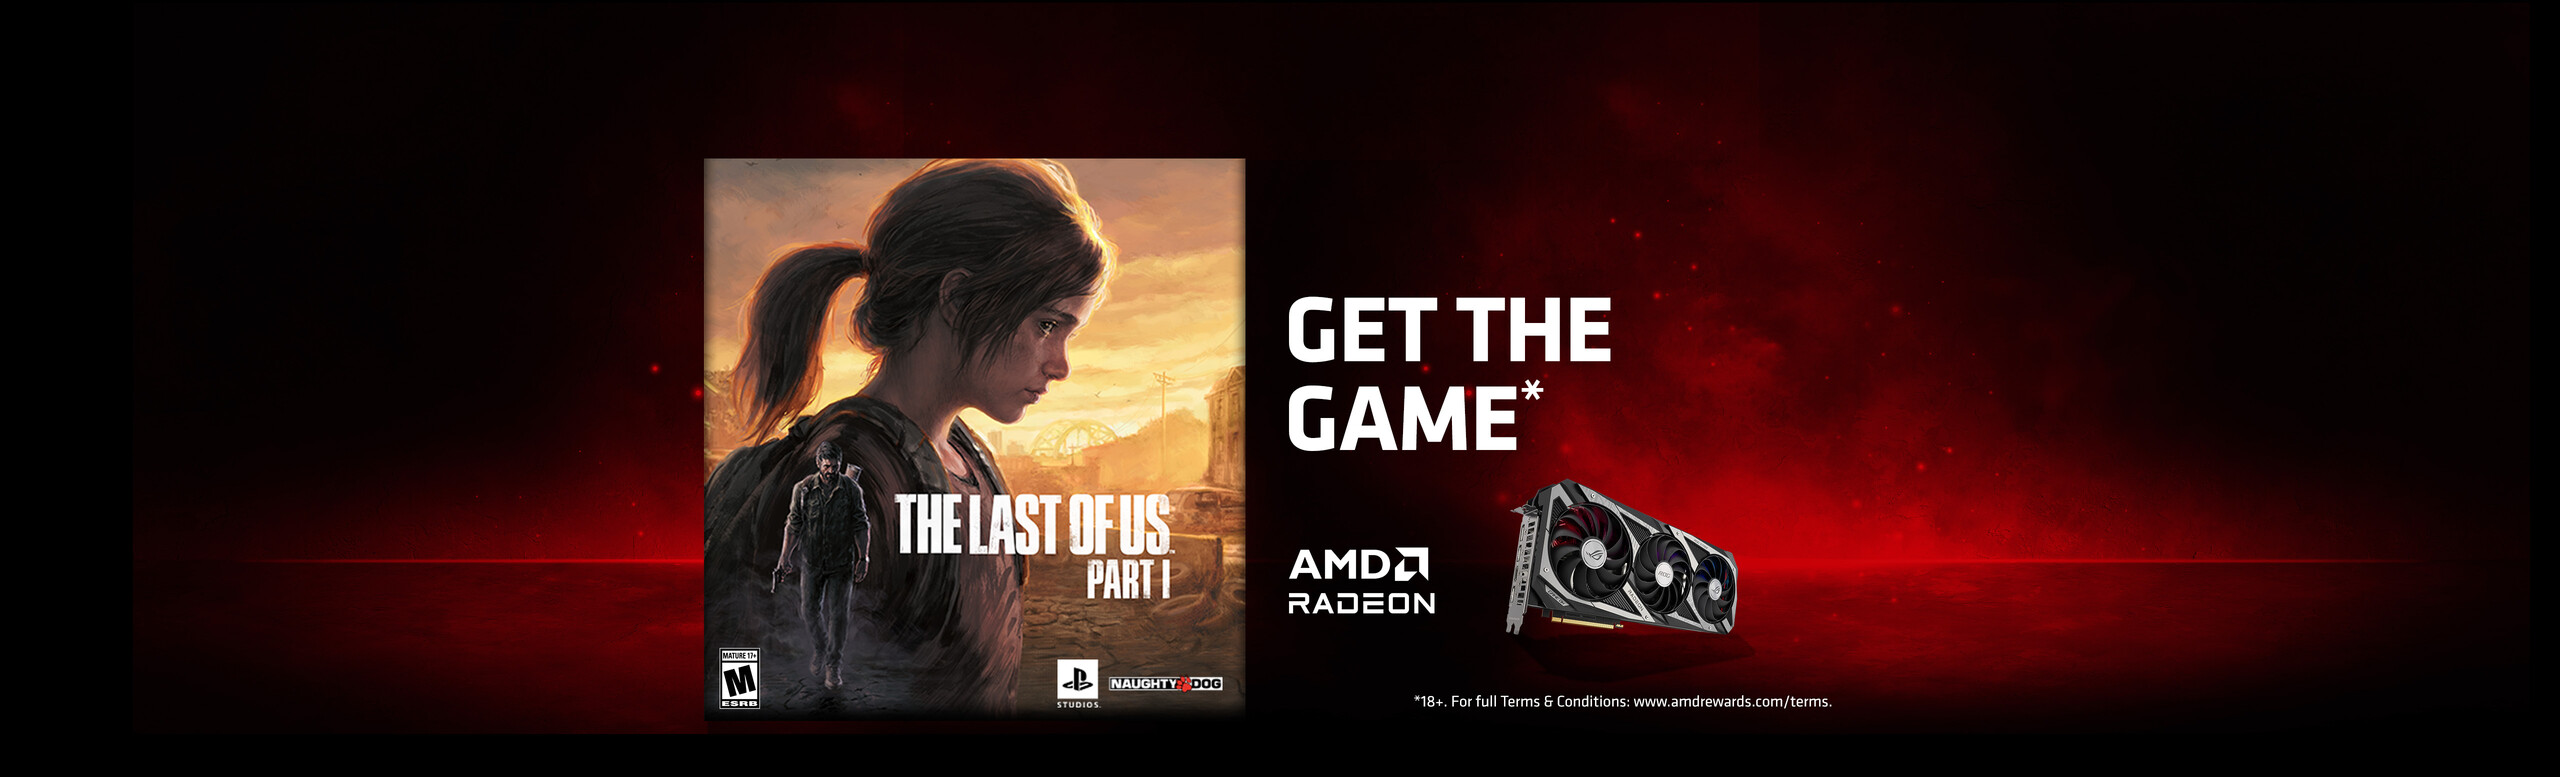 AMD Last of Us Game Bundle with ROG and ASUS graphics cards